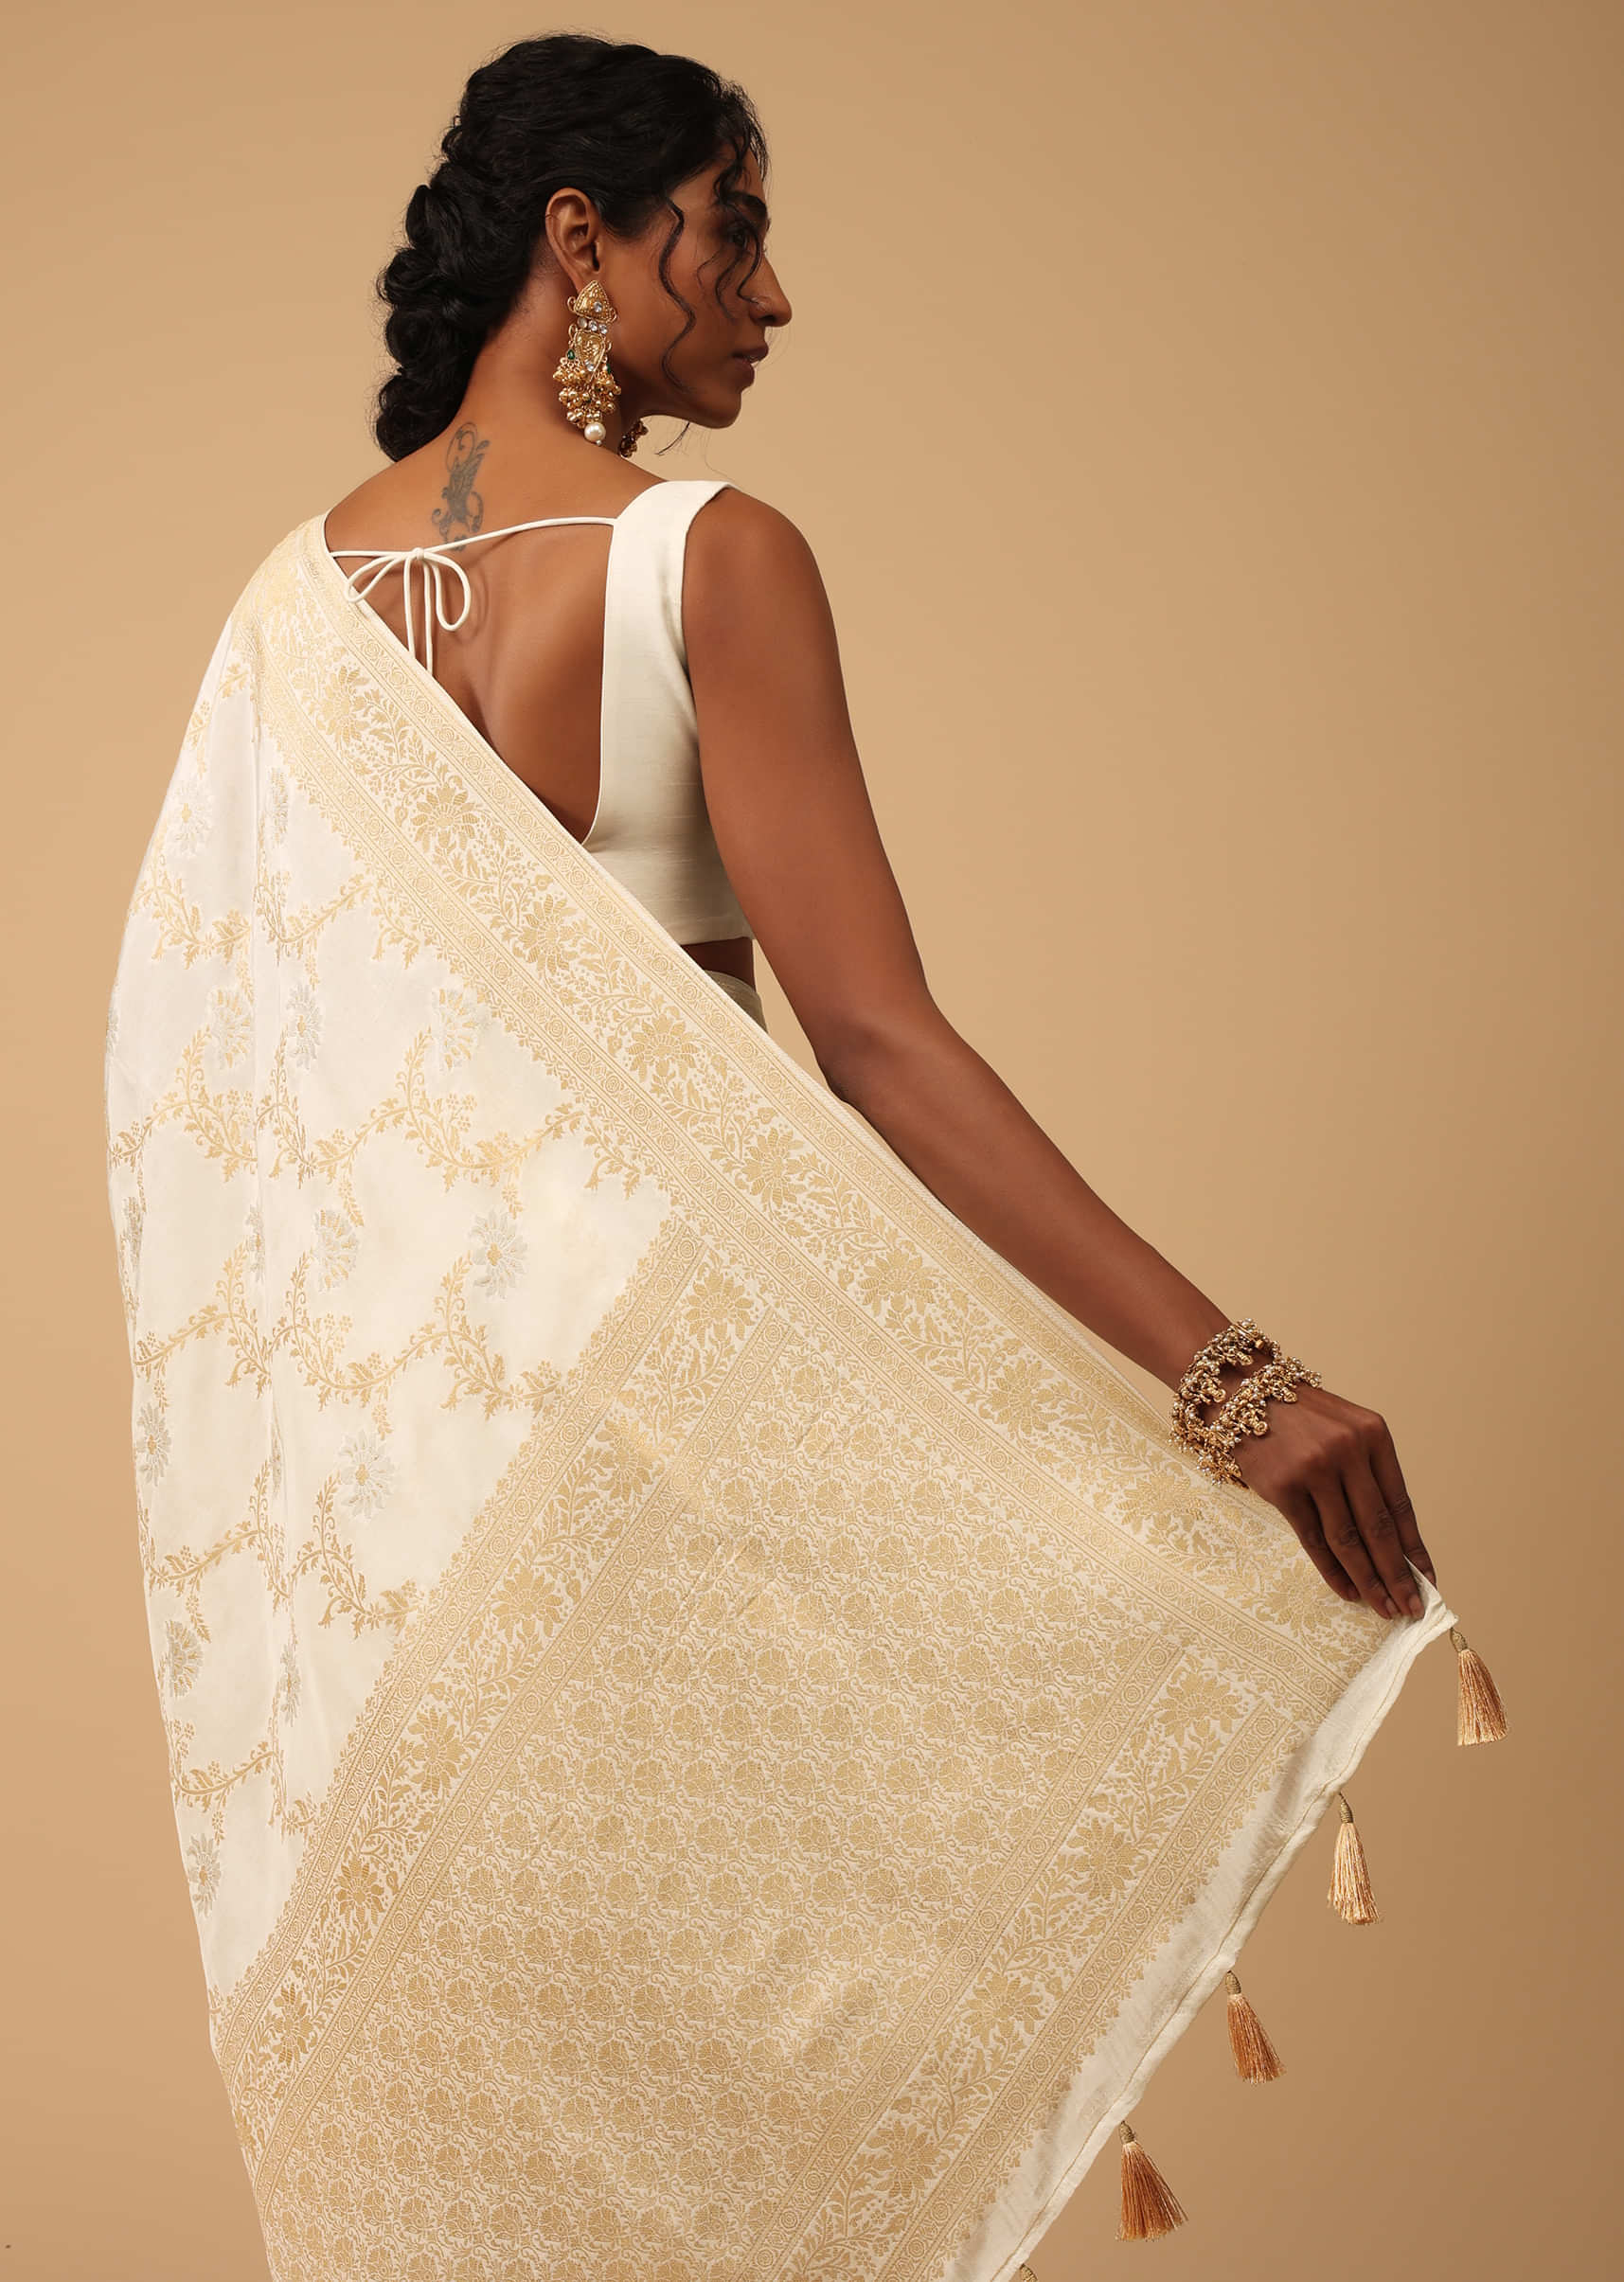 Ivory White Dola Silk Saree With Silver And Gold Jaal Embroidery In Floral Pattern